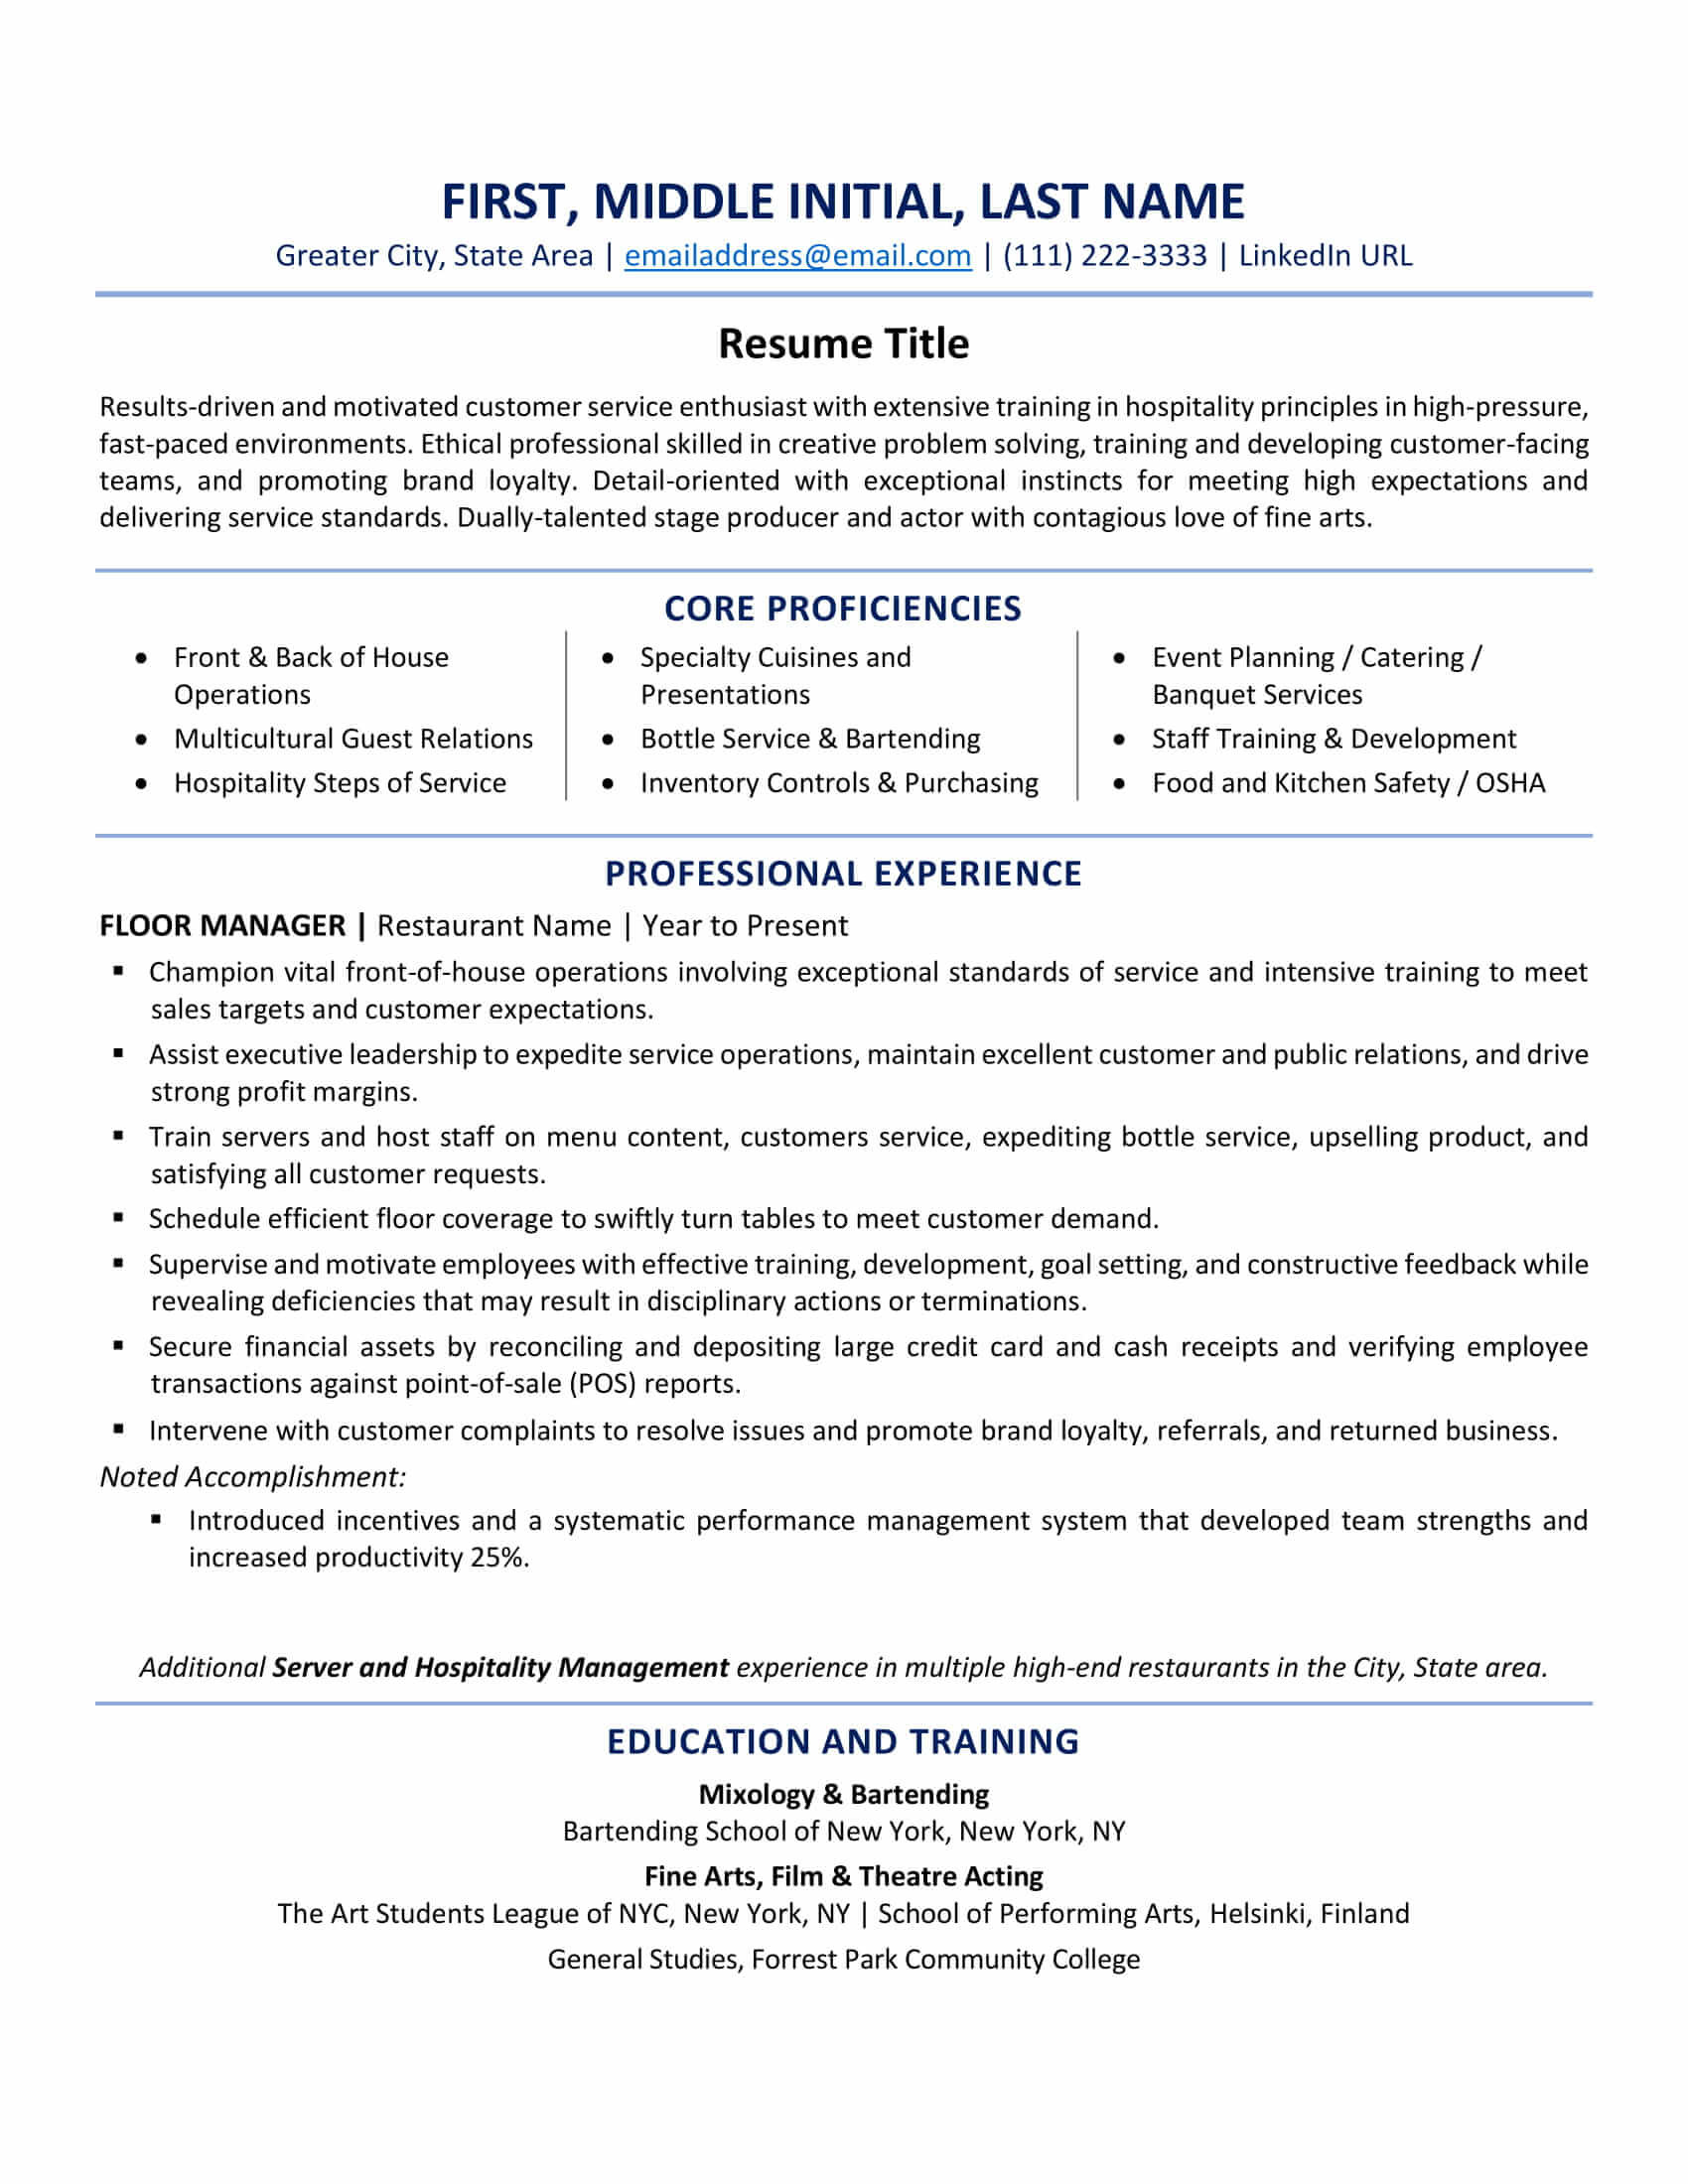 Resume Template for Long Term Employment 7 No-fail Resume Tips for Older Workers (lancarrezekiq Examples) Zipjob